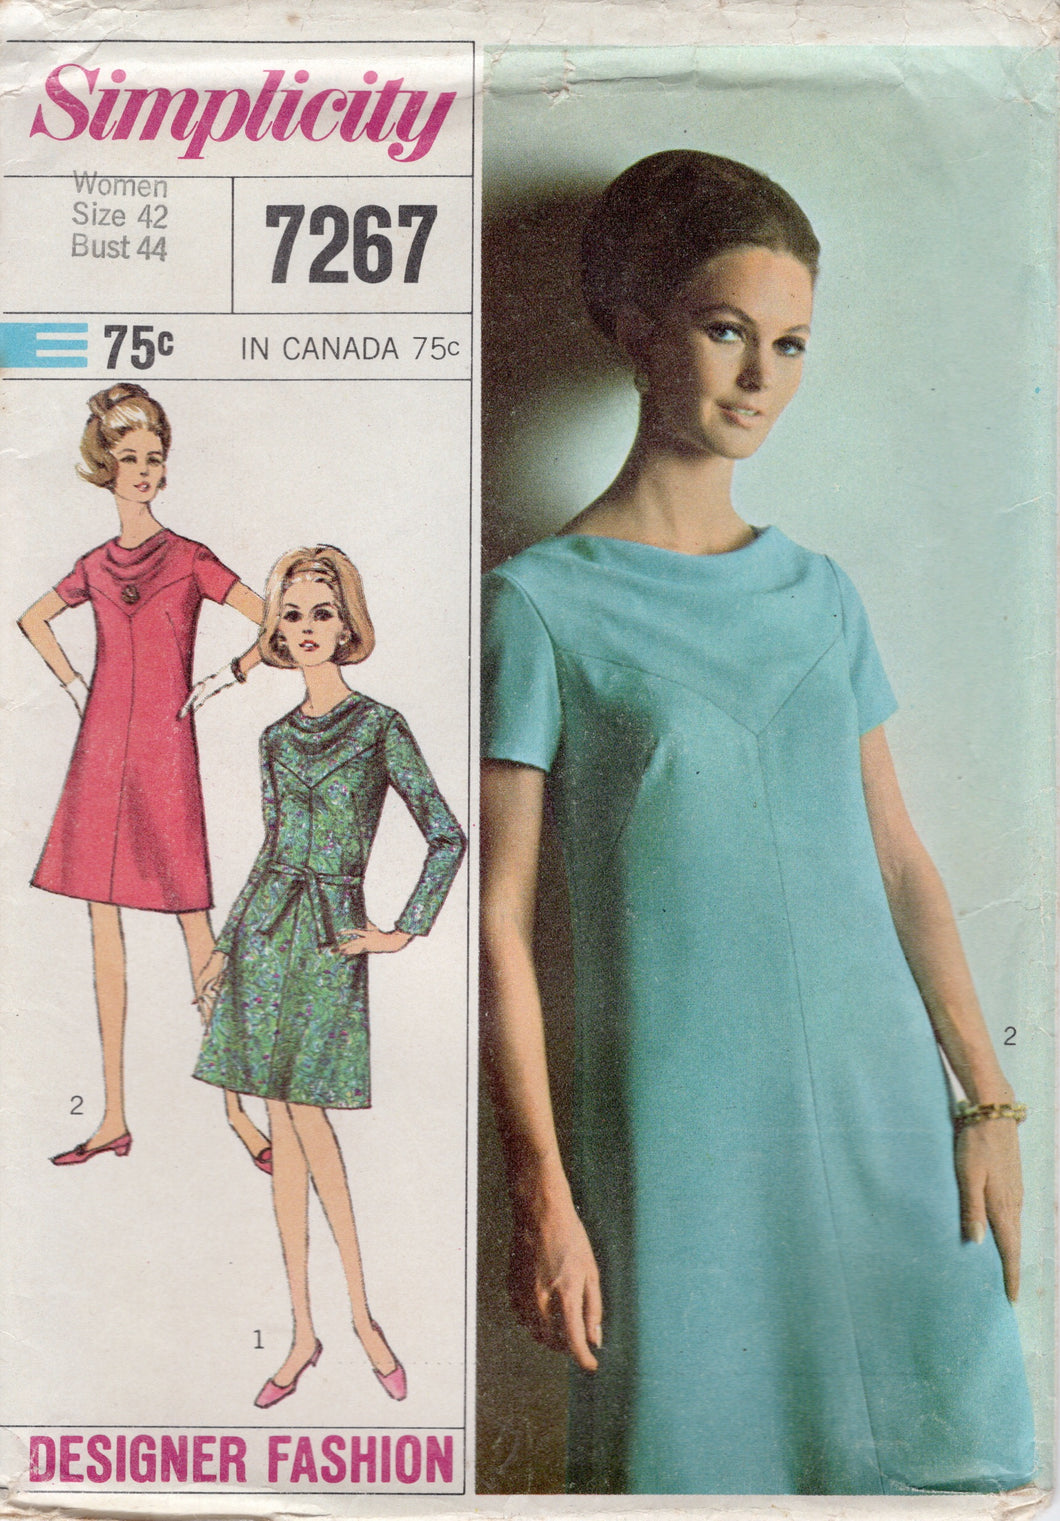 1960's Simplicity Designer One Piece Dress with Cowl Collar Pattern - Bust 44